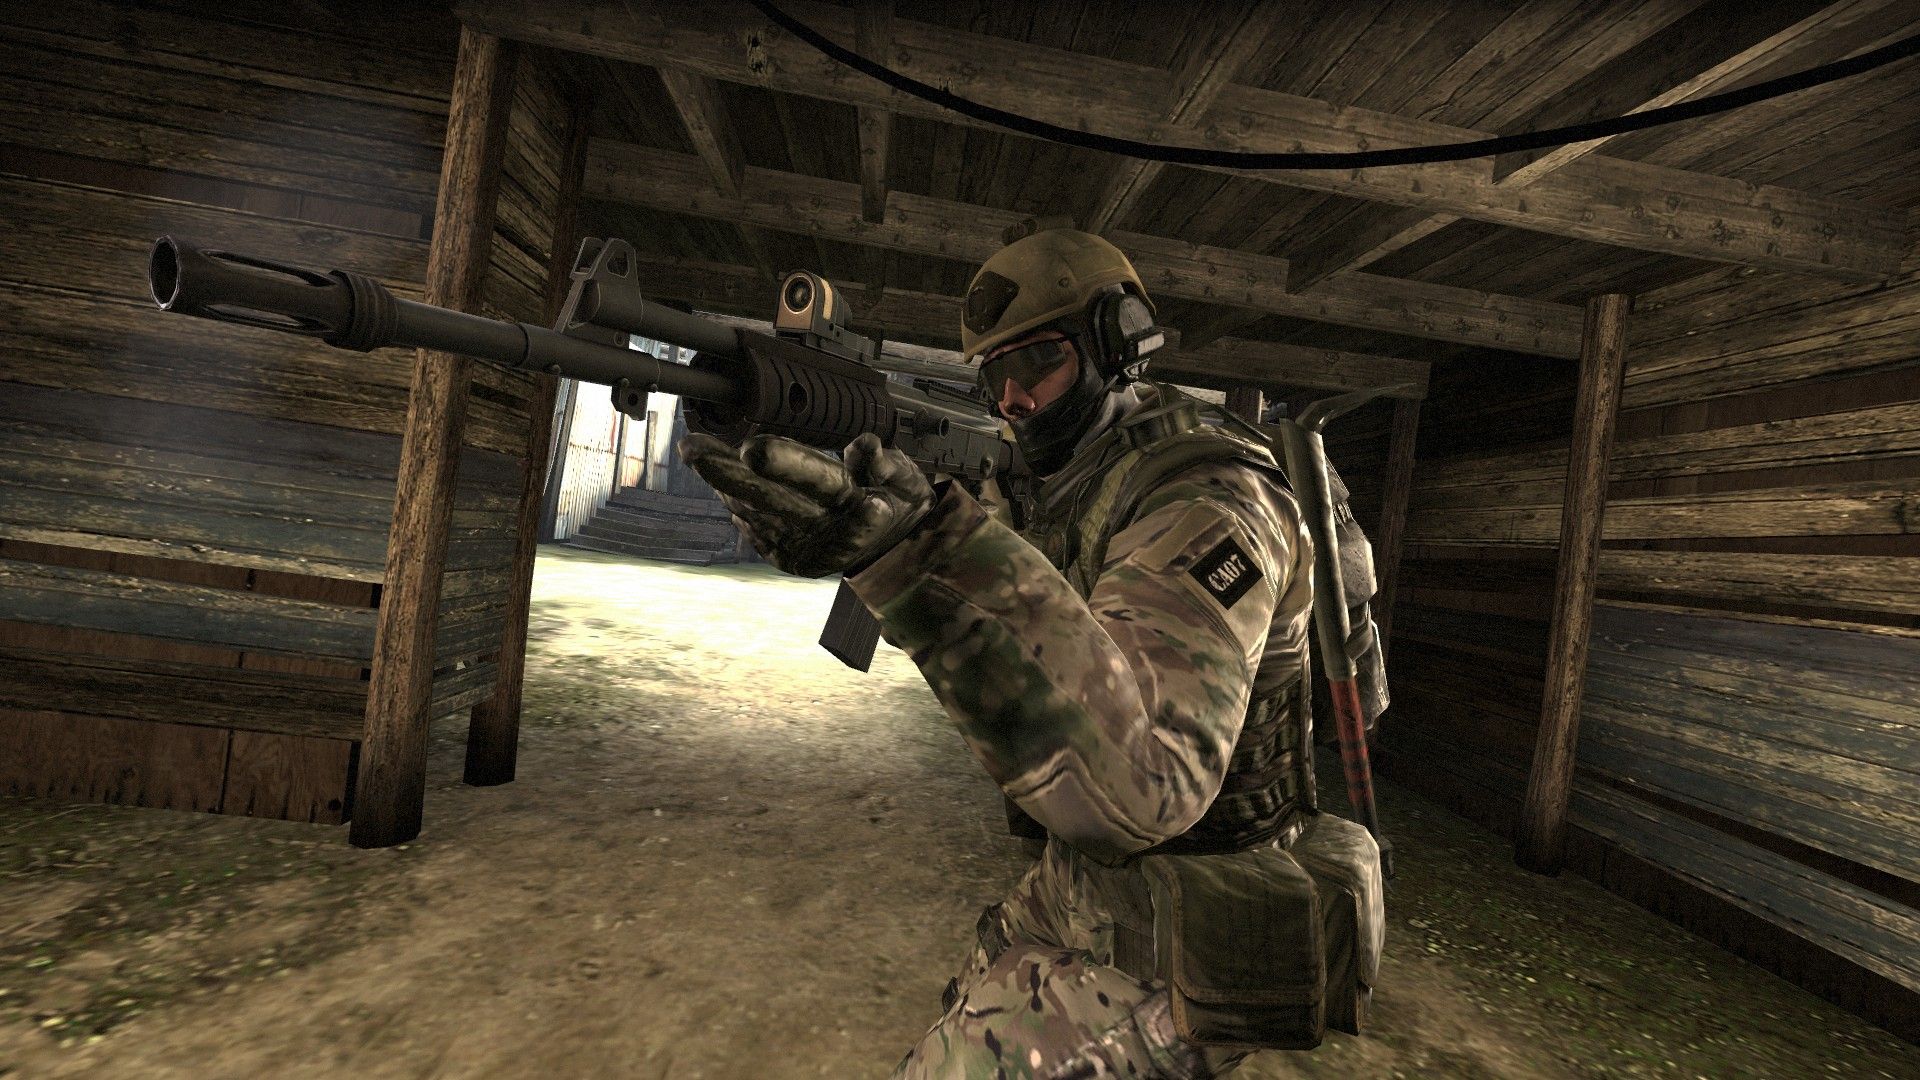 Counter-Strike: Global Offensive expands the arsenal with new modes and media